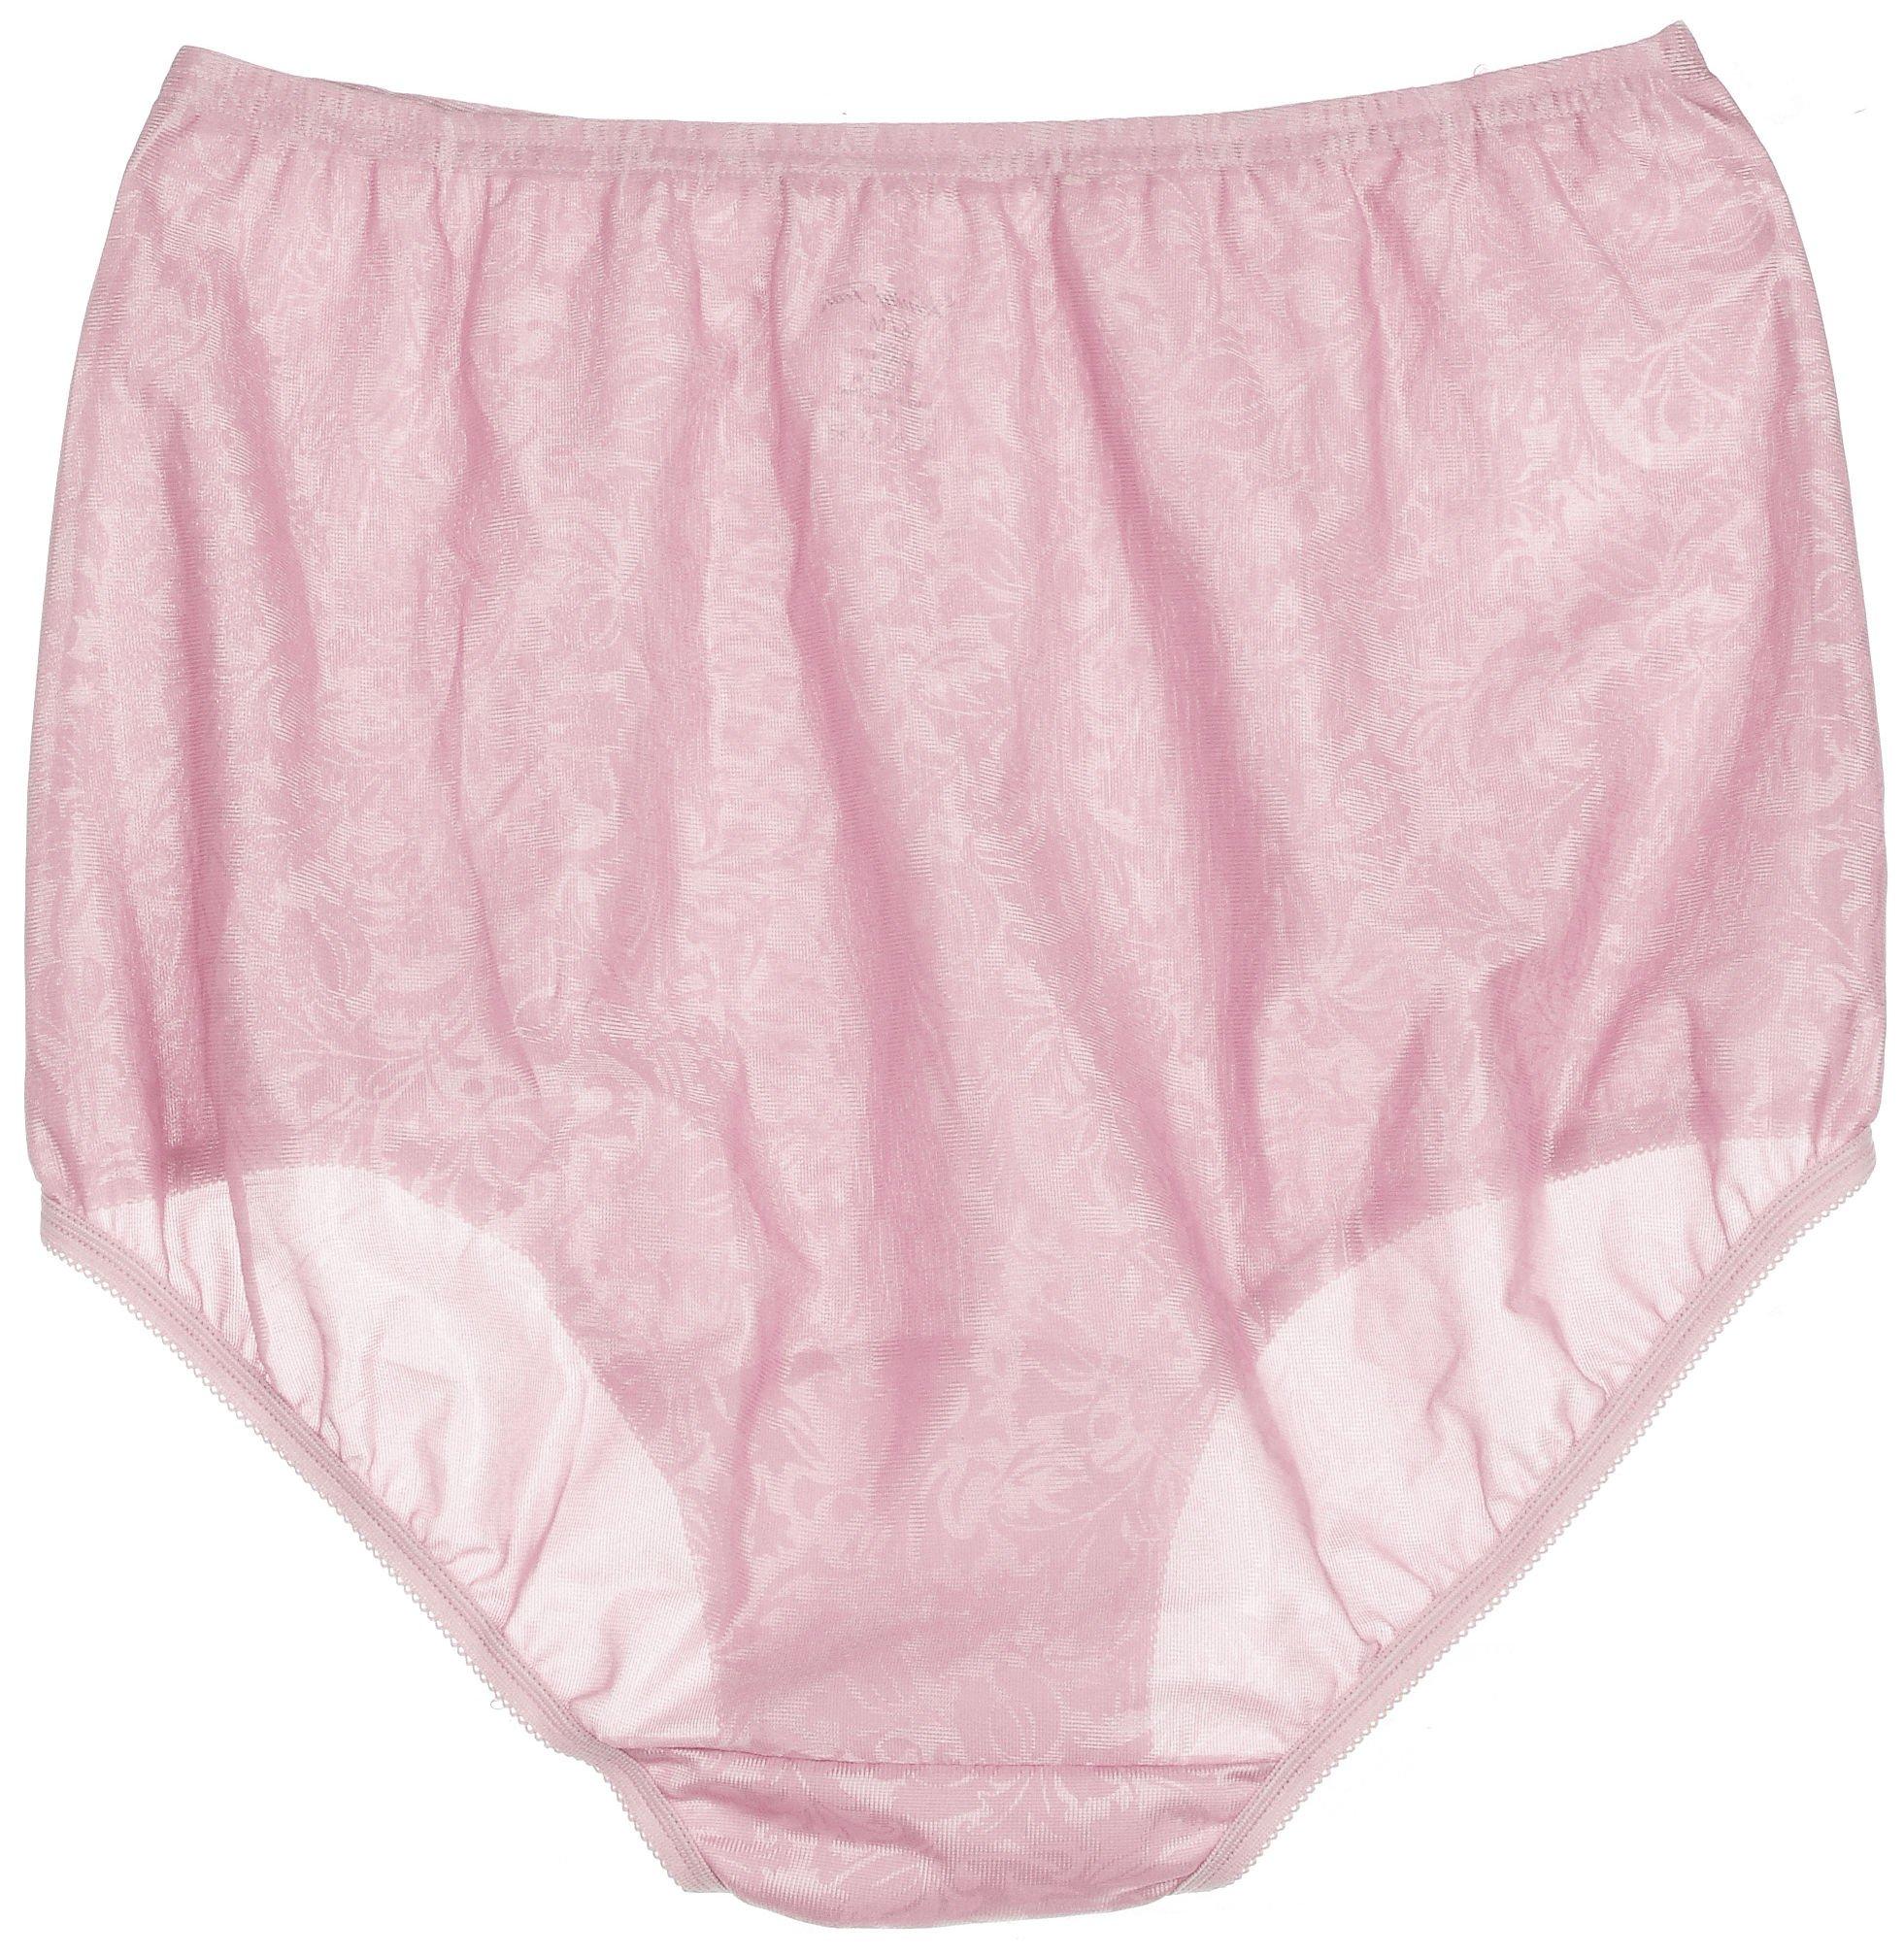 2 Vanity Fair Brief Panty Nylon 15712 Perfectly Yours 8 Xl Blushing Pink For Sale Online Ebay